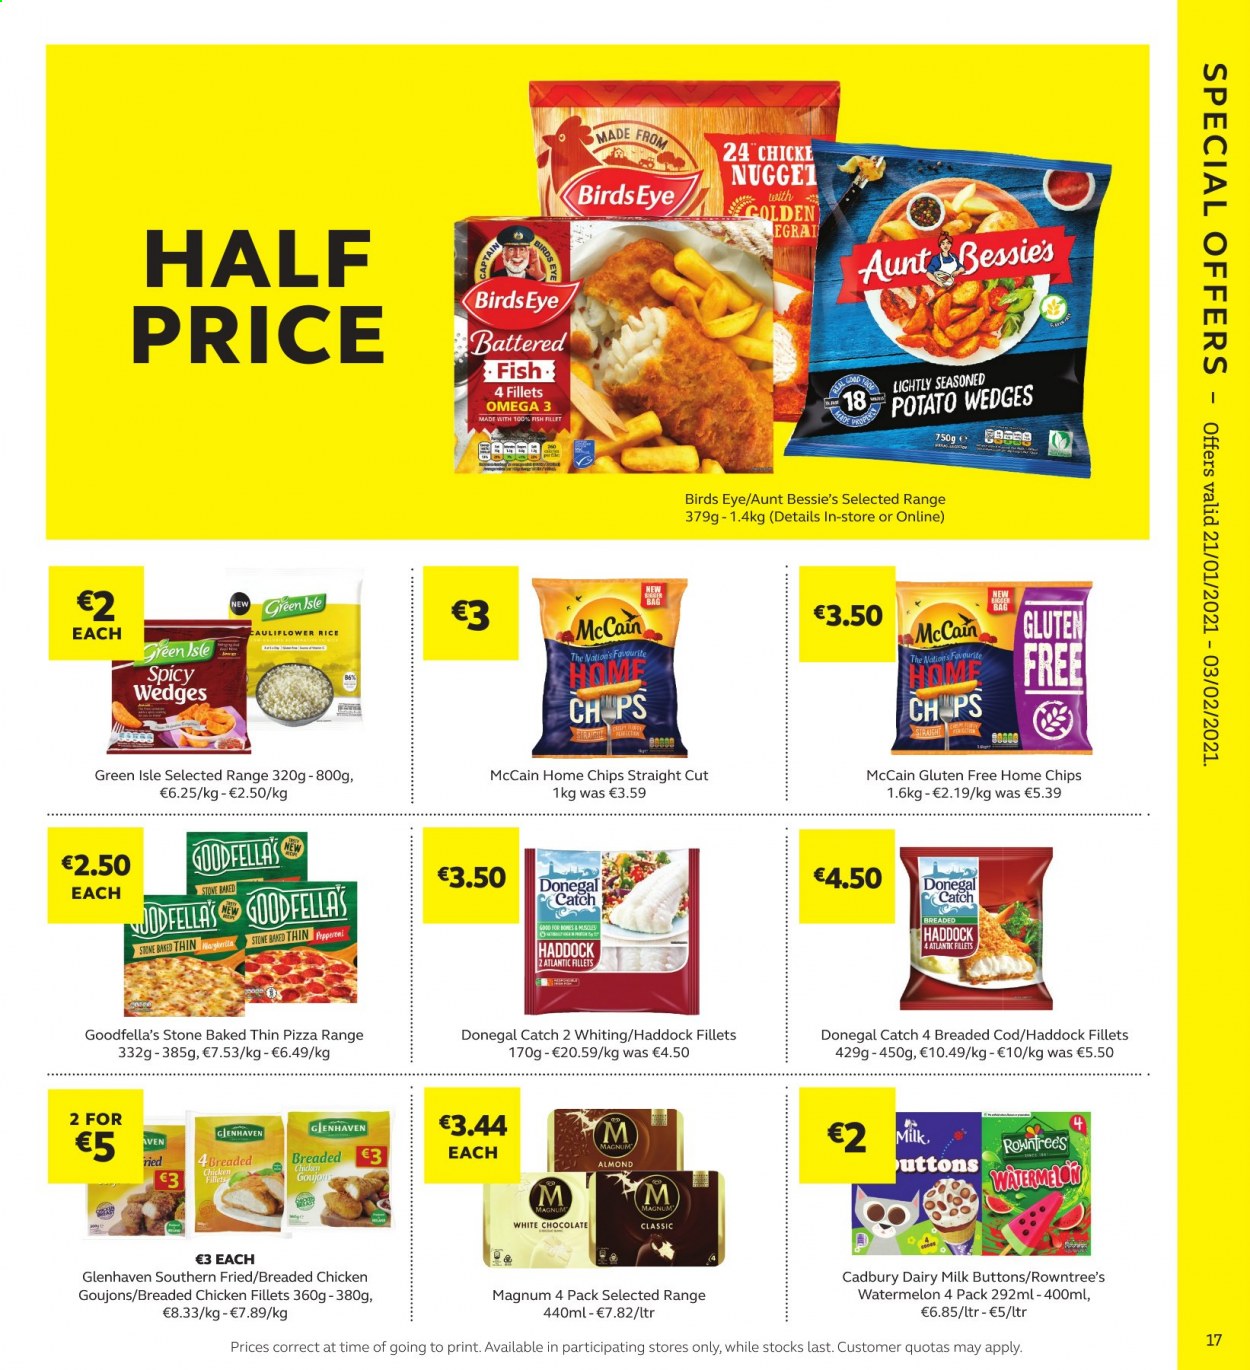 thumbnail - SuperValu offer  - 21.01.2021 - 03.02.2021 - Sales products - cauliflower, watermelon, cod, haddock, fish, whiting, pizza, fried chicken, Bird's Eye, Donegal Catch, McCain, potato wedges, white chocolate, chocolate, Cadbury, Dairy Milk, chips, rice, almonds, Omega-3. Page 17.